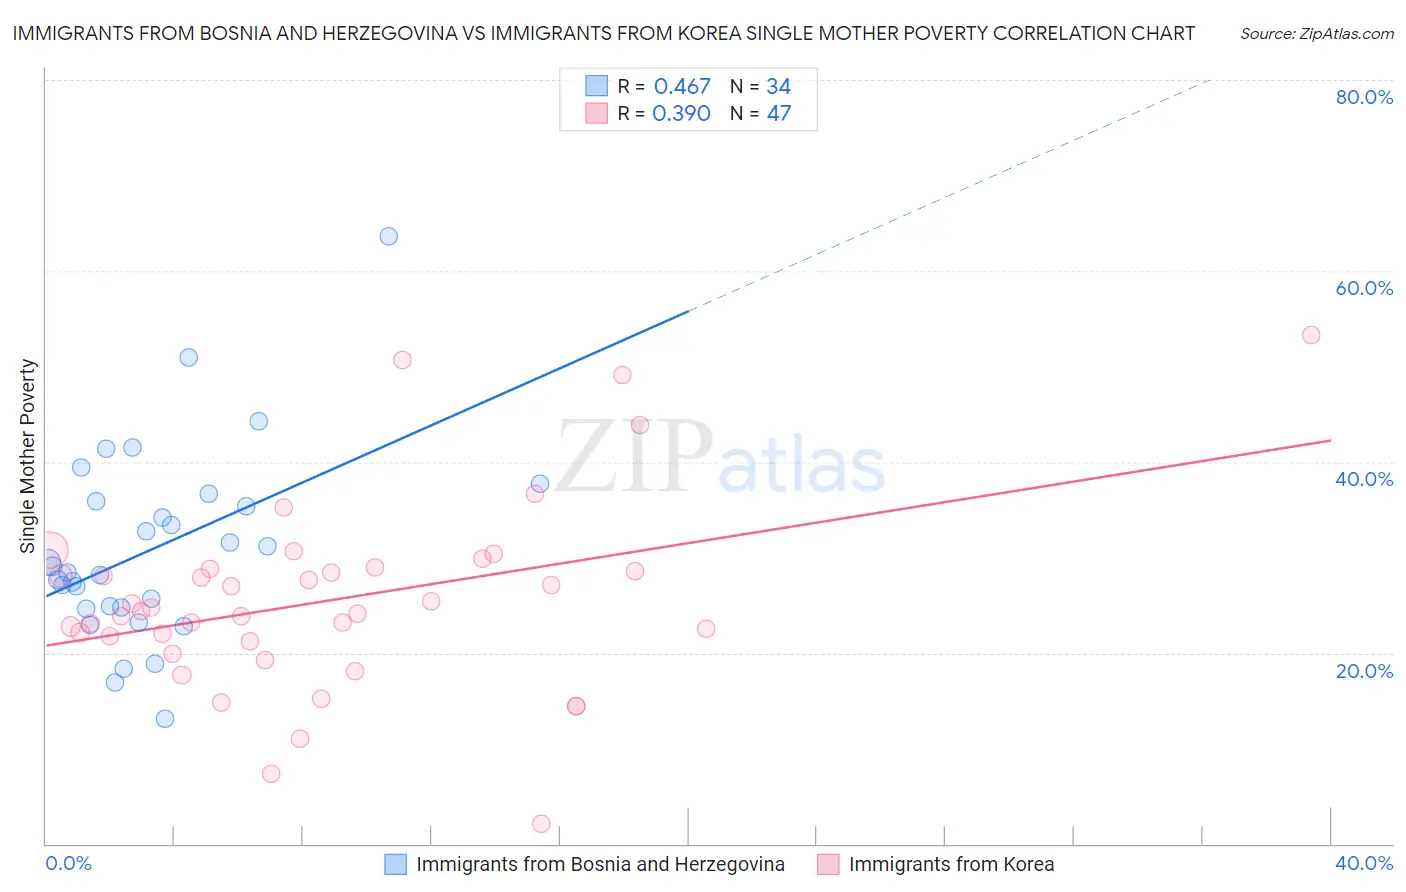 Immigrants from Bosnia and Herzegovina vs Immigrants from Korea Single Mother Poverty